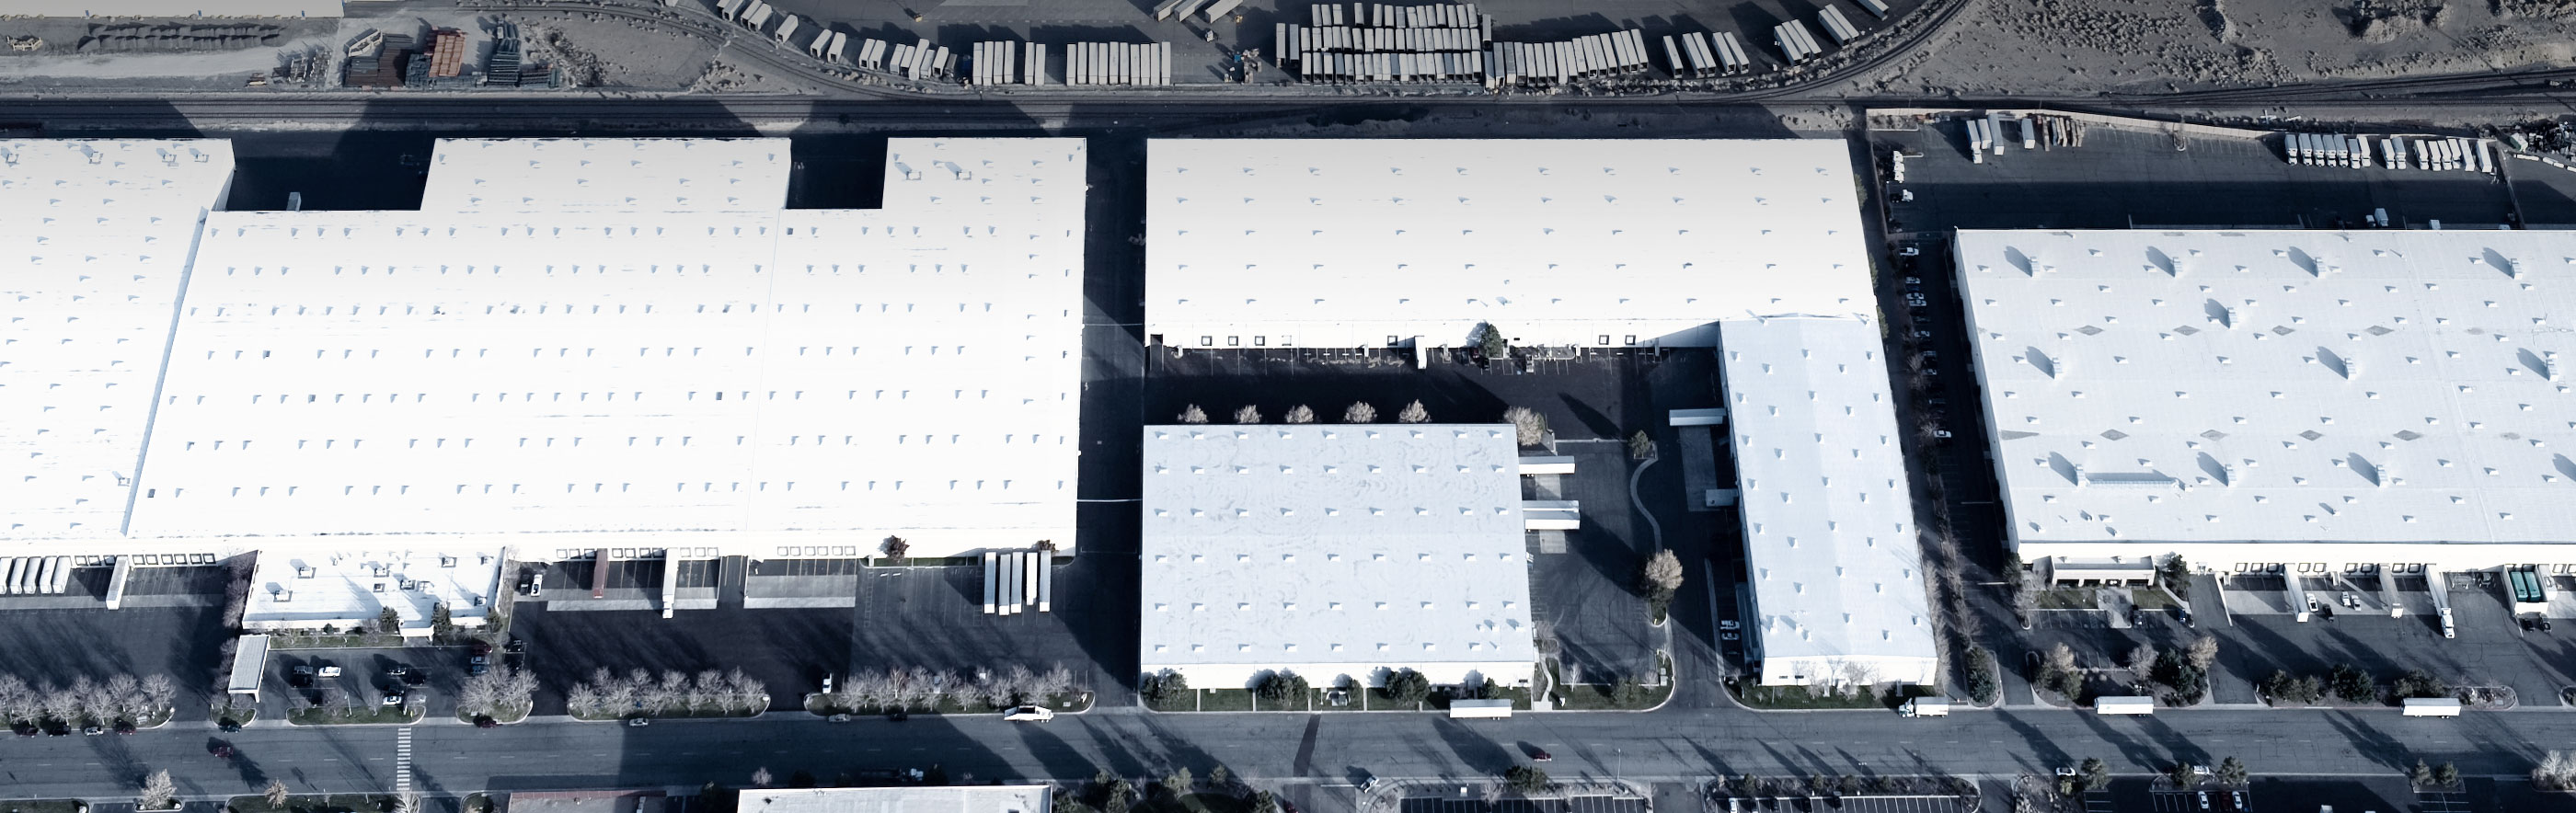 Overhead view of Empire Roofing commercial building project in Toronto/Mississauga or London/Windsor, Ontario region